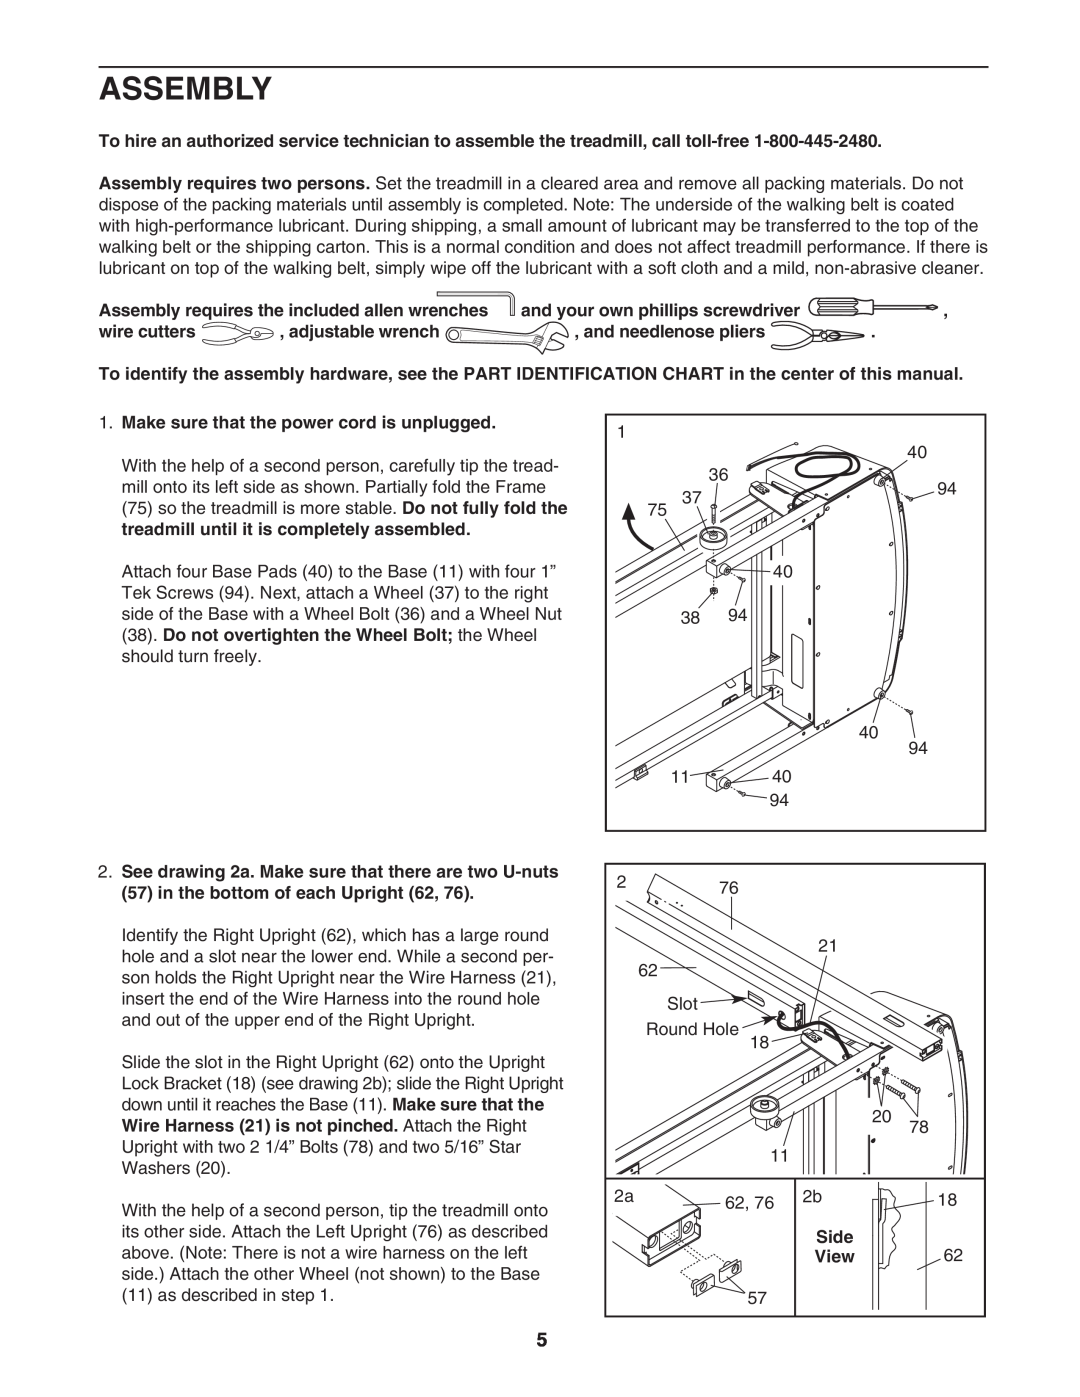 Image IMTL41205.0 user manual Assembly 